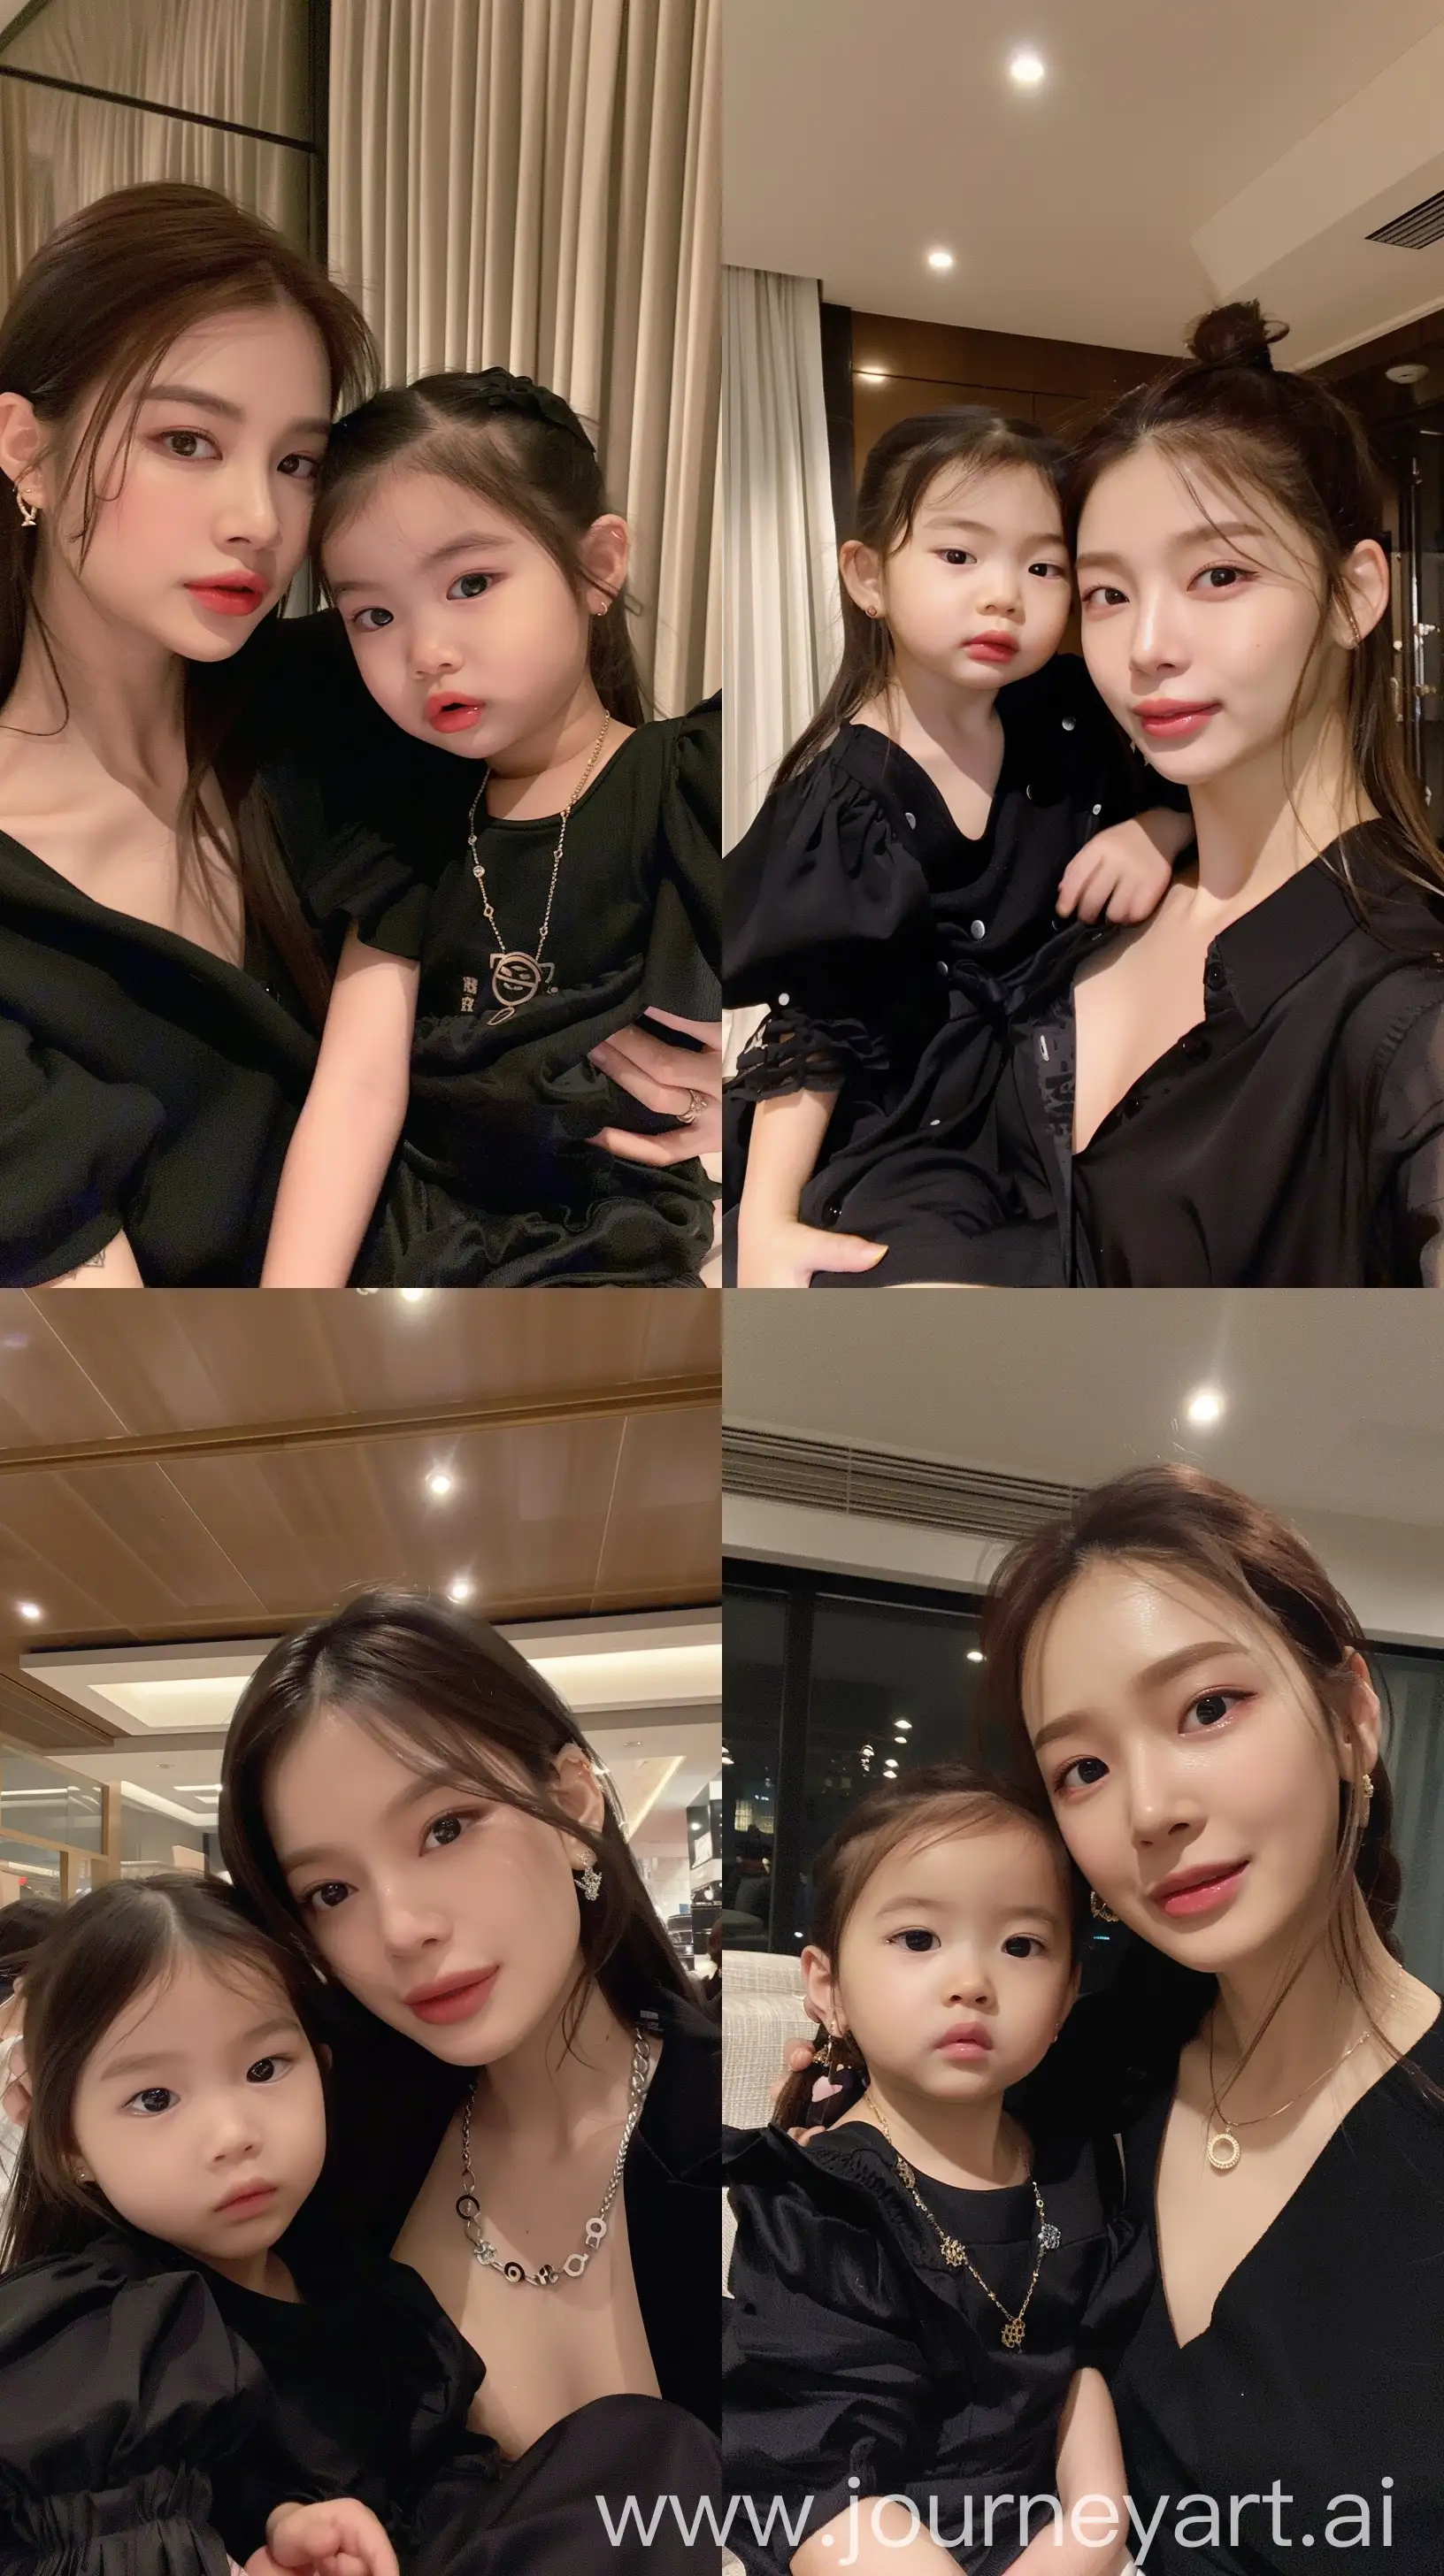 blackpink's jennie selfie with 2 years old  girl, facial feature look a like blackpink's jennie, aestethic casual photo, wearing black outfit, night times, aestethic make up,hotly elegant young mom --ar 9:16 